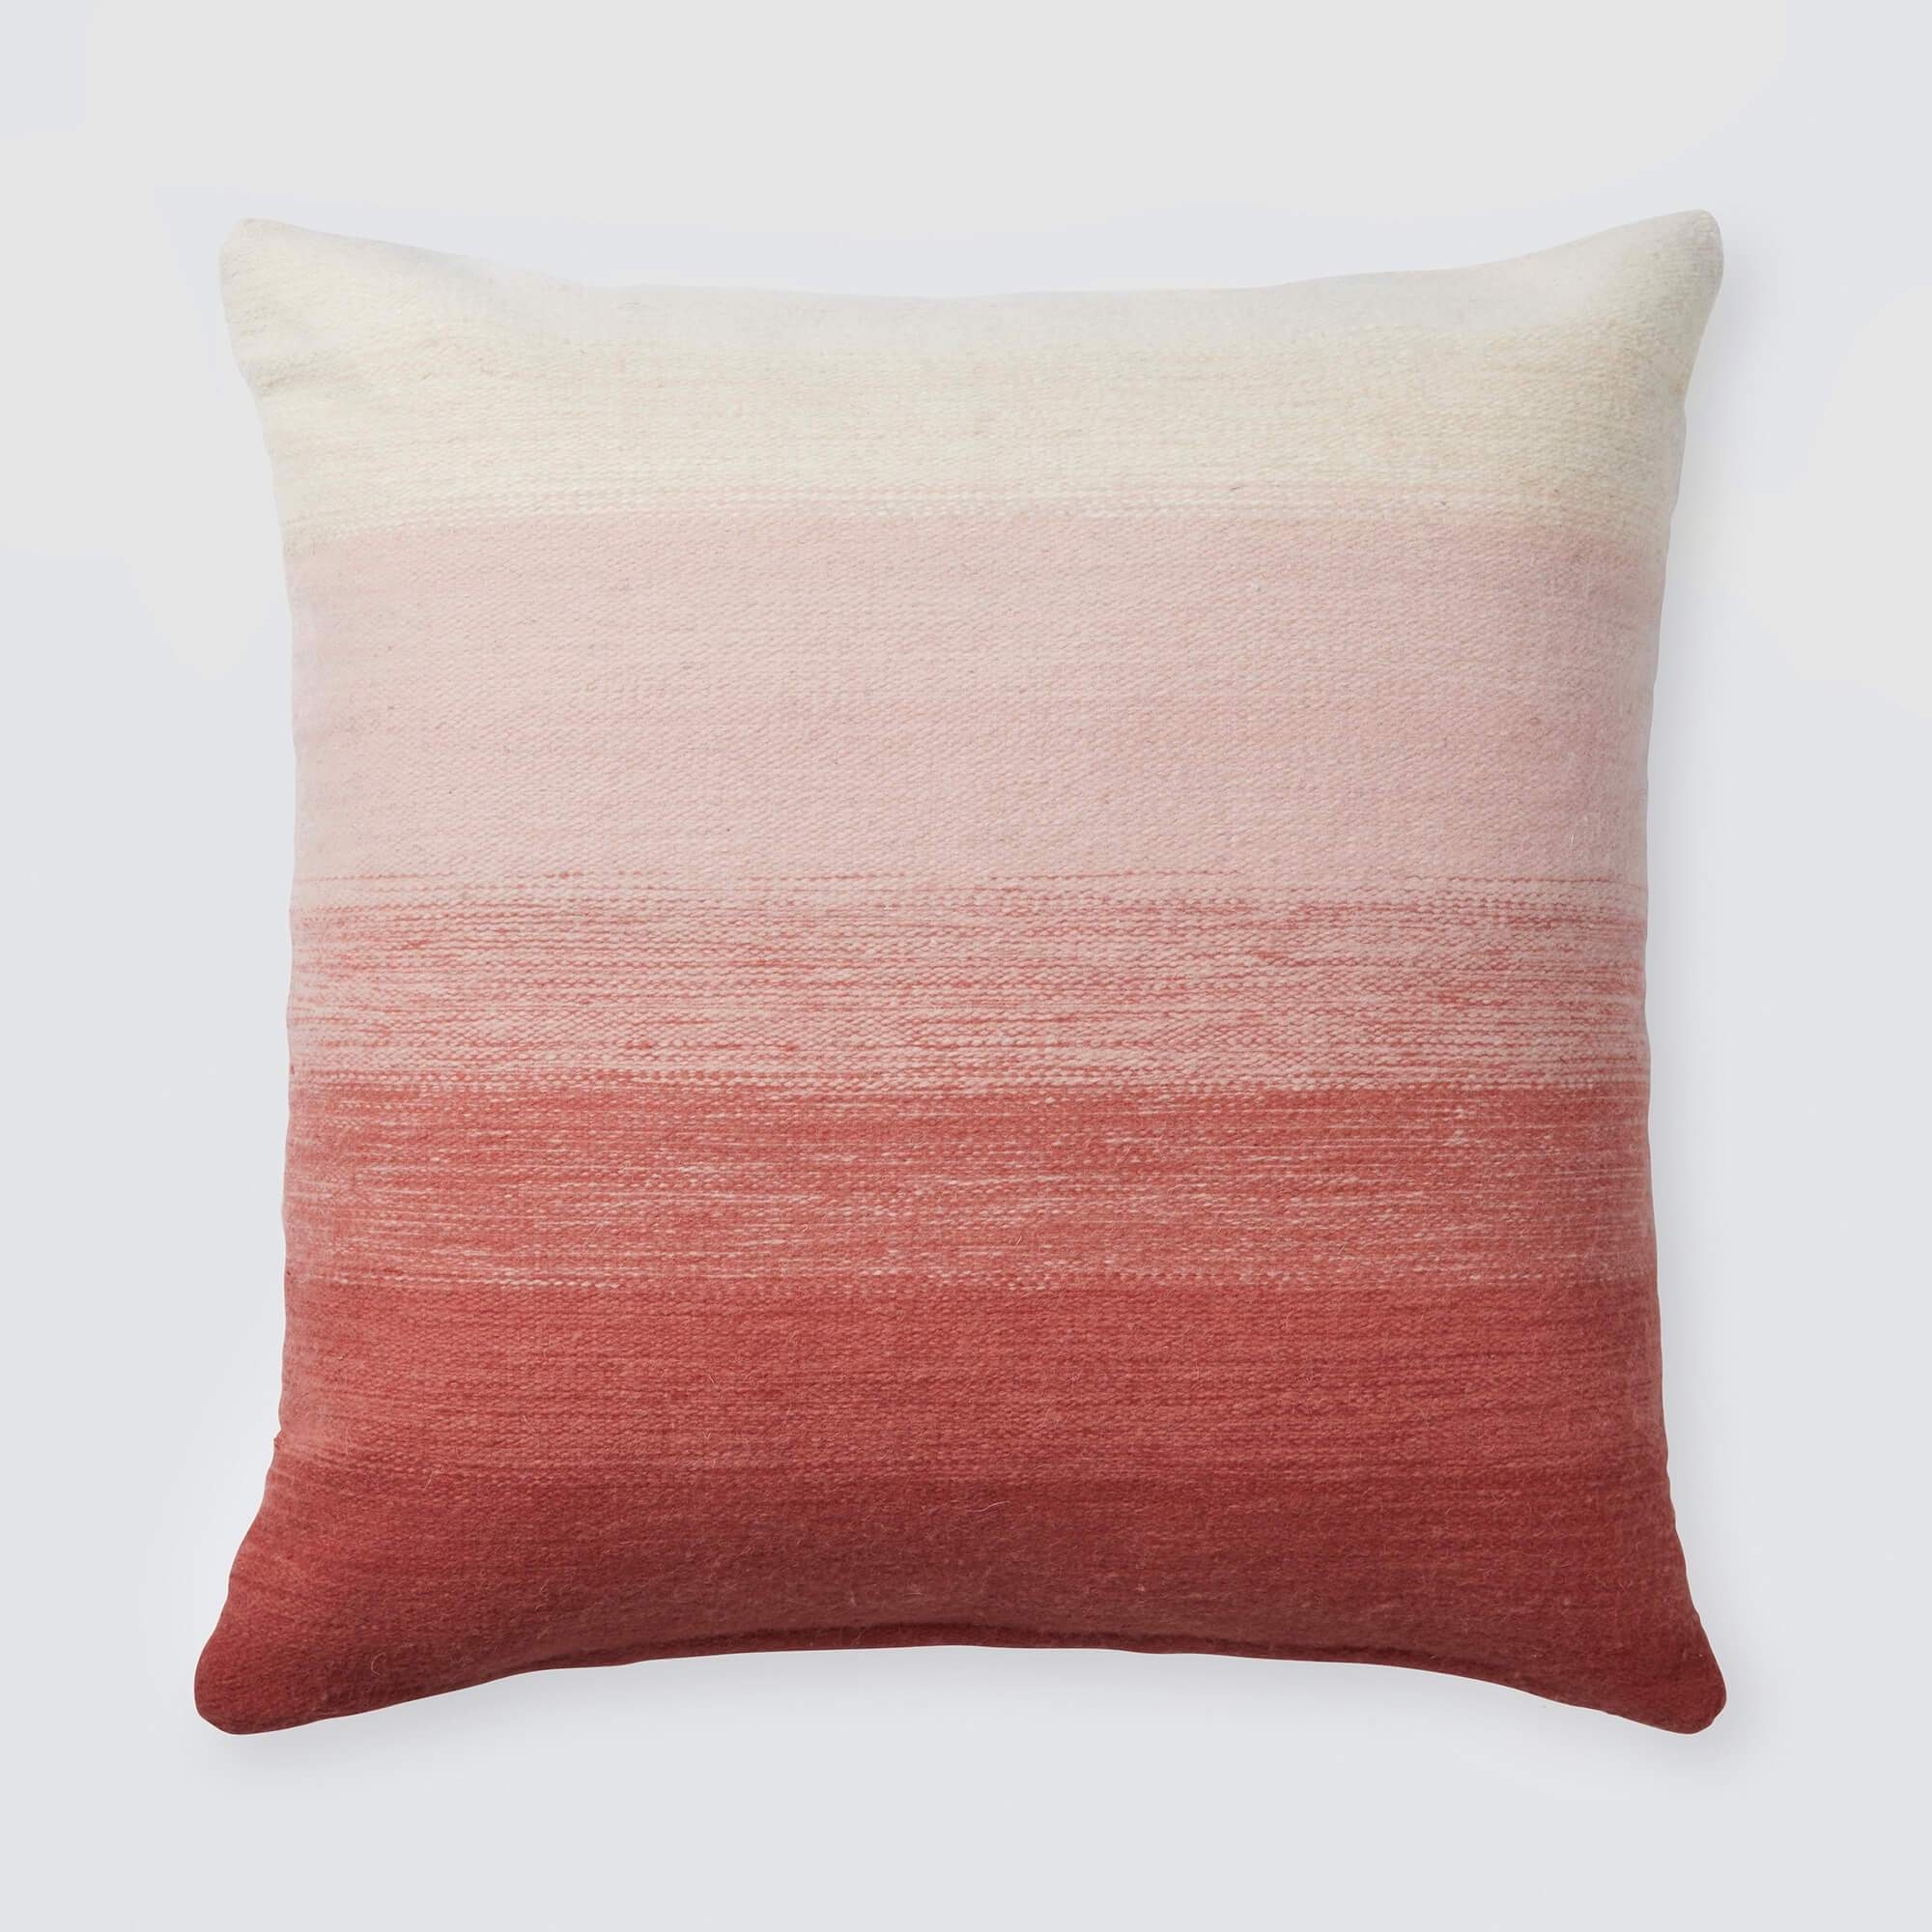 The Citizenry Marea Pillow | 22" x 22" | Made You Blush - Image 0